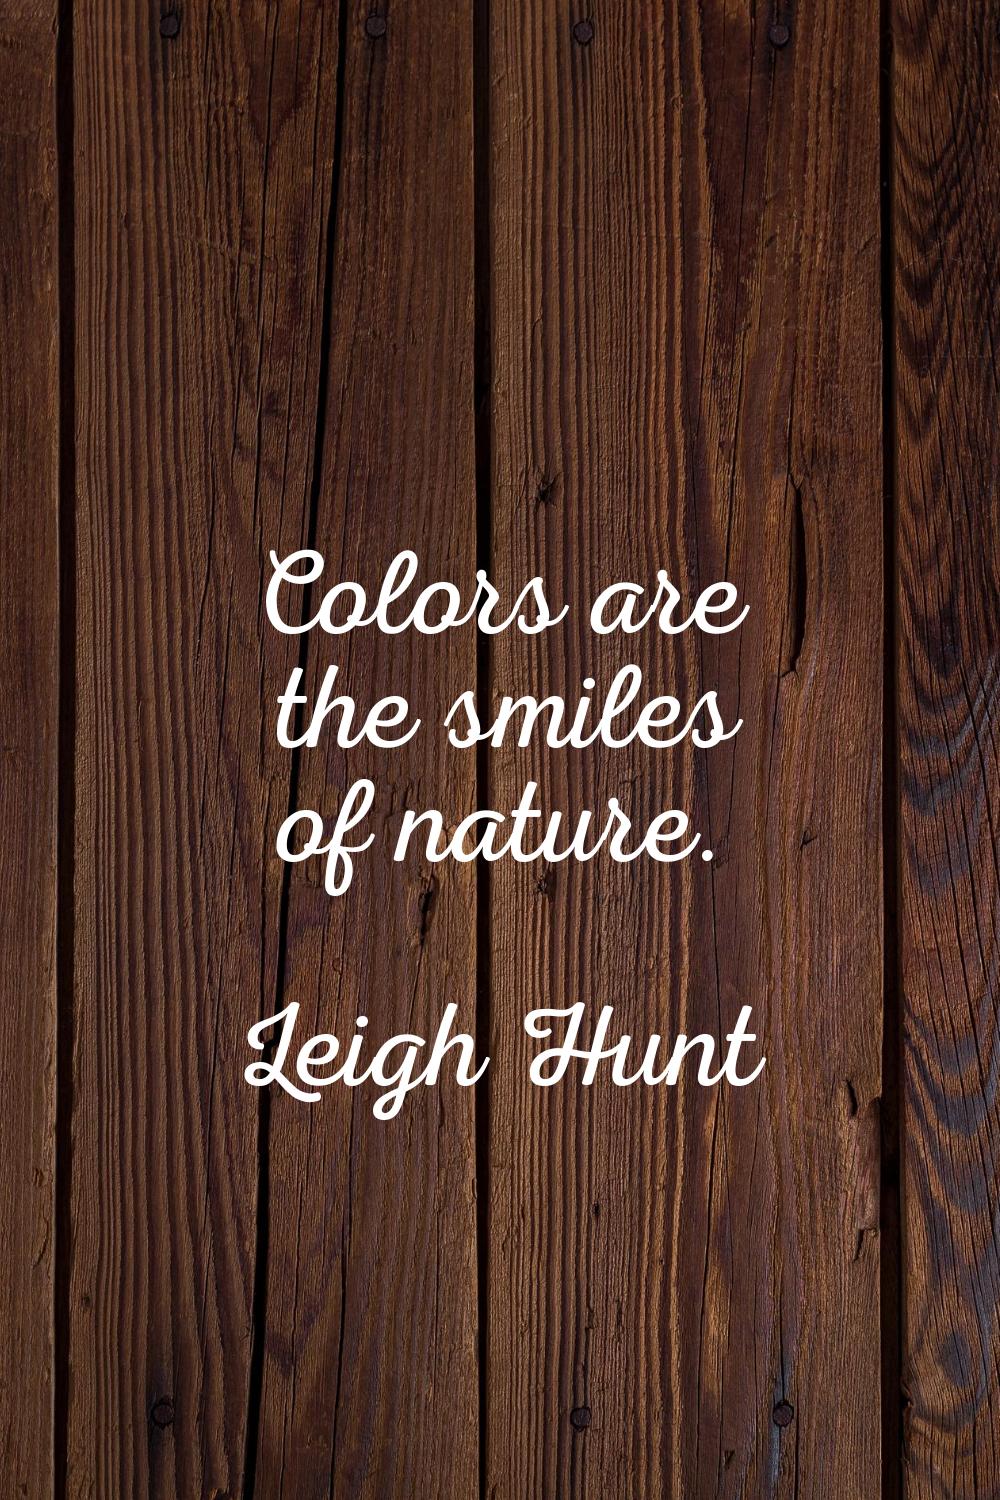 Colors are the smiles of nature.